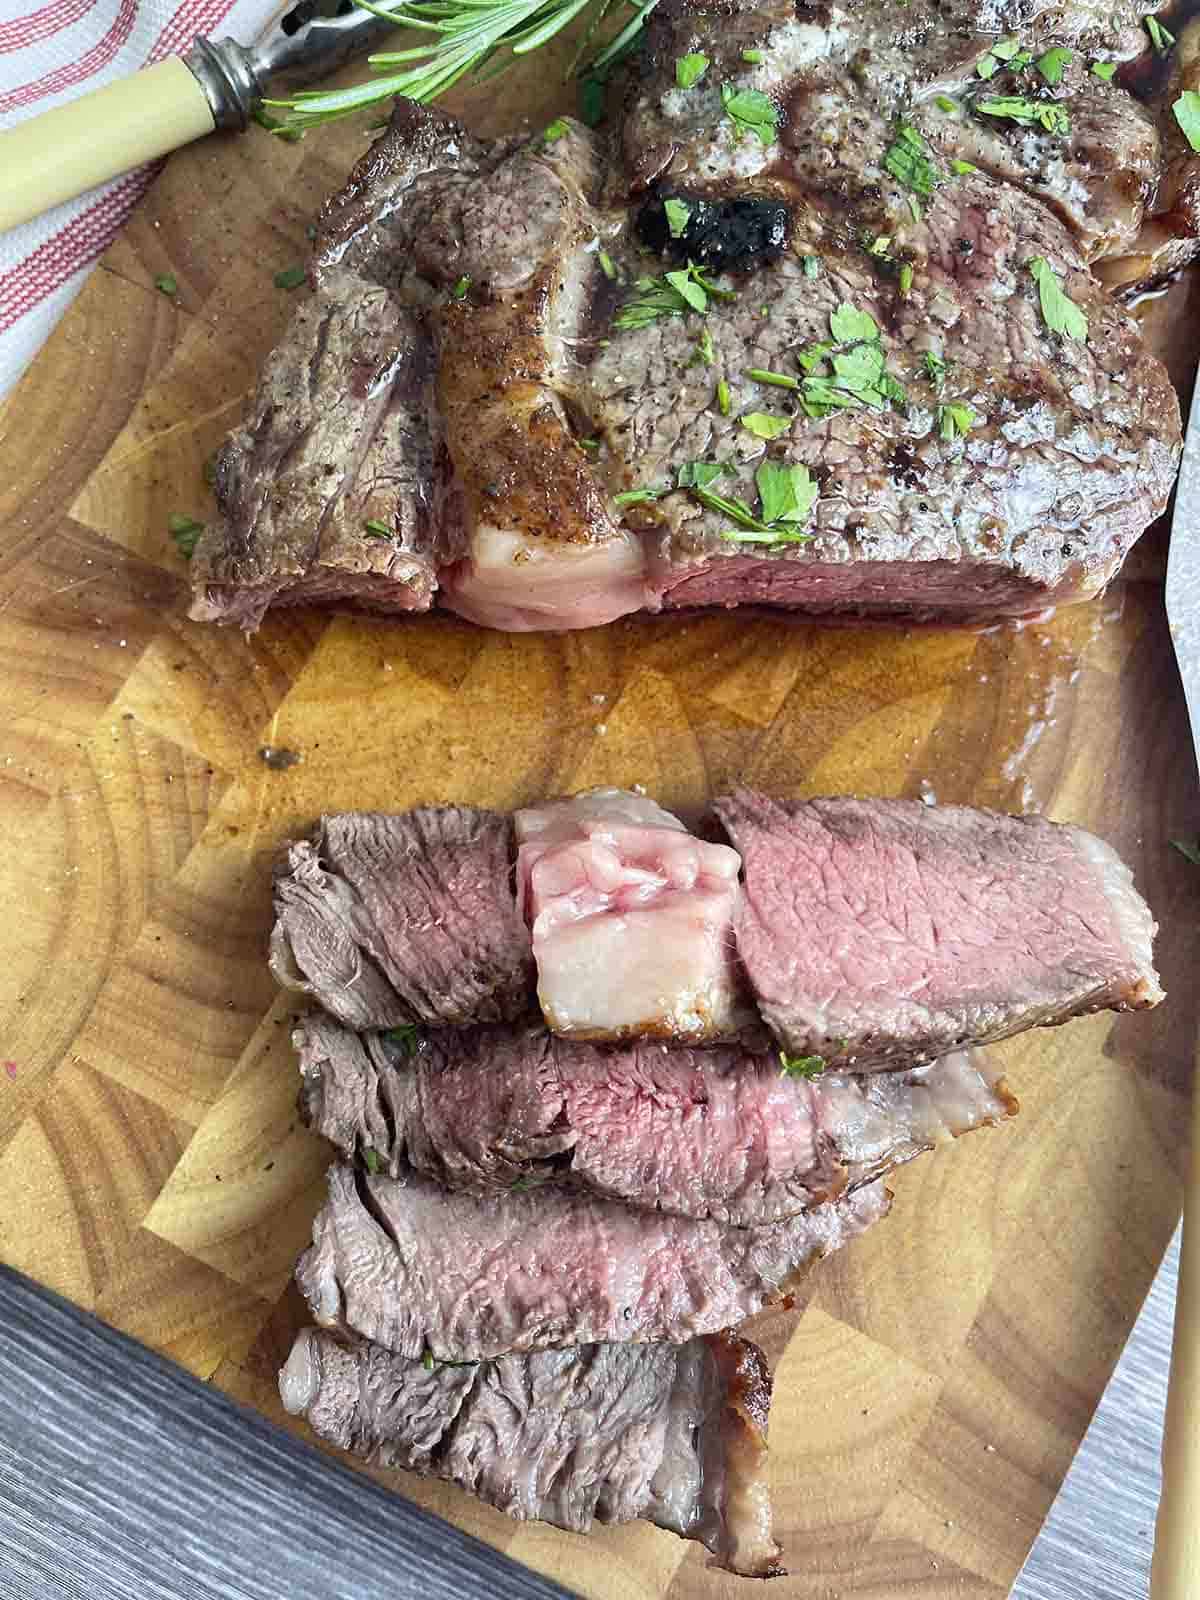 cooked steak cut on a board.